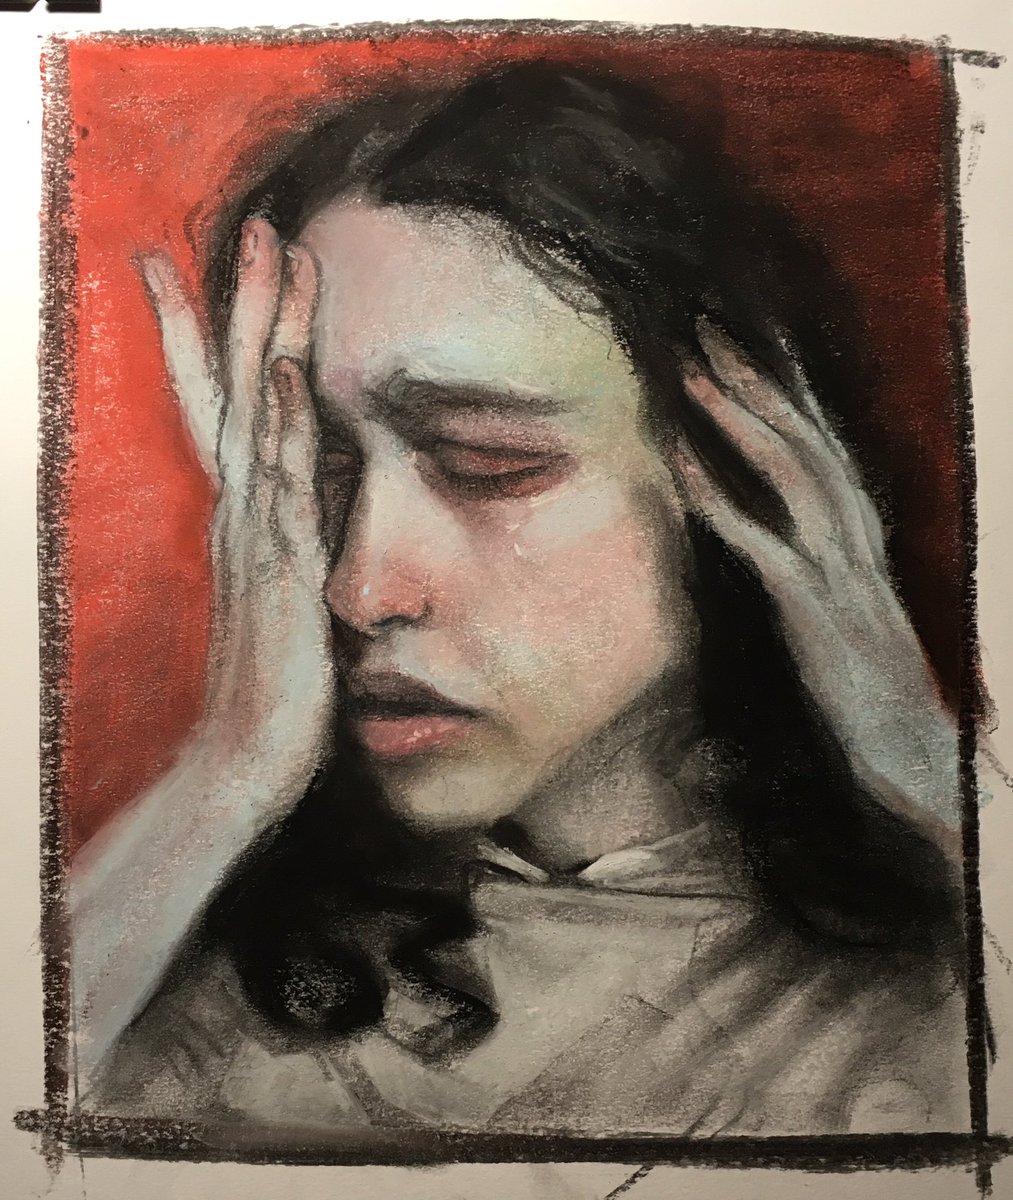 Evening portrait - The tears
Charcoal and soft pastel on paper 
#portrait #softpastel #pastel #painting #drawing #art #figurepainting #traditionalart #colours